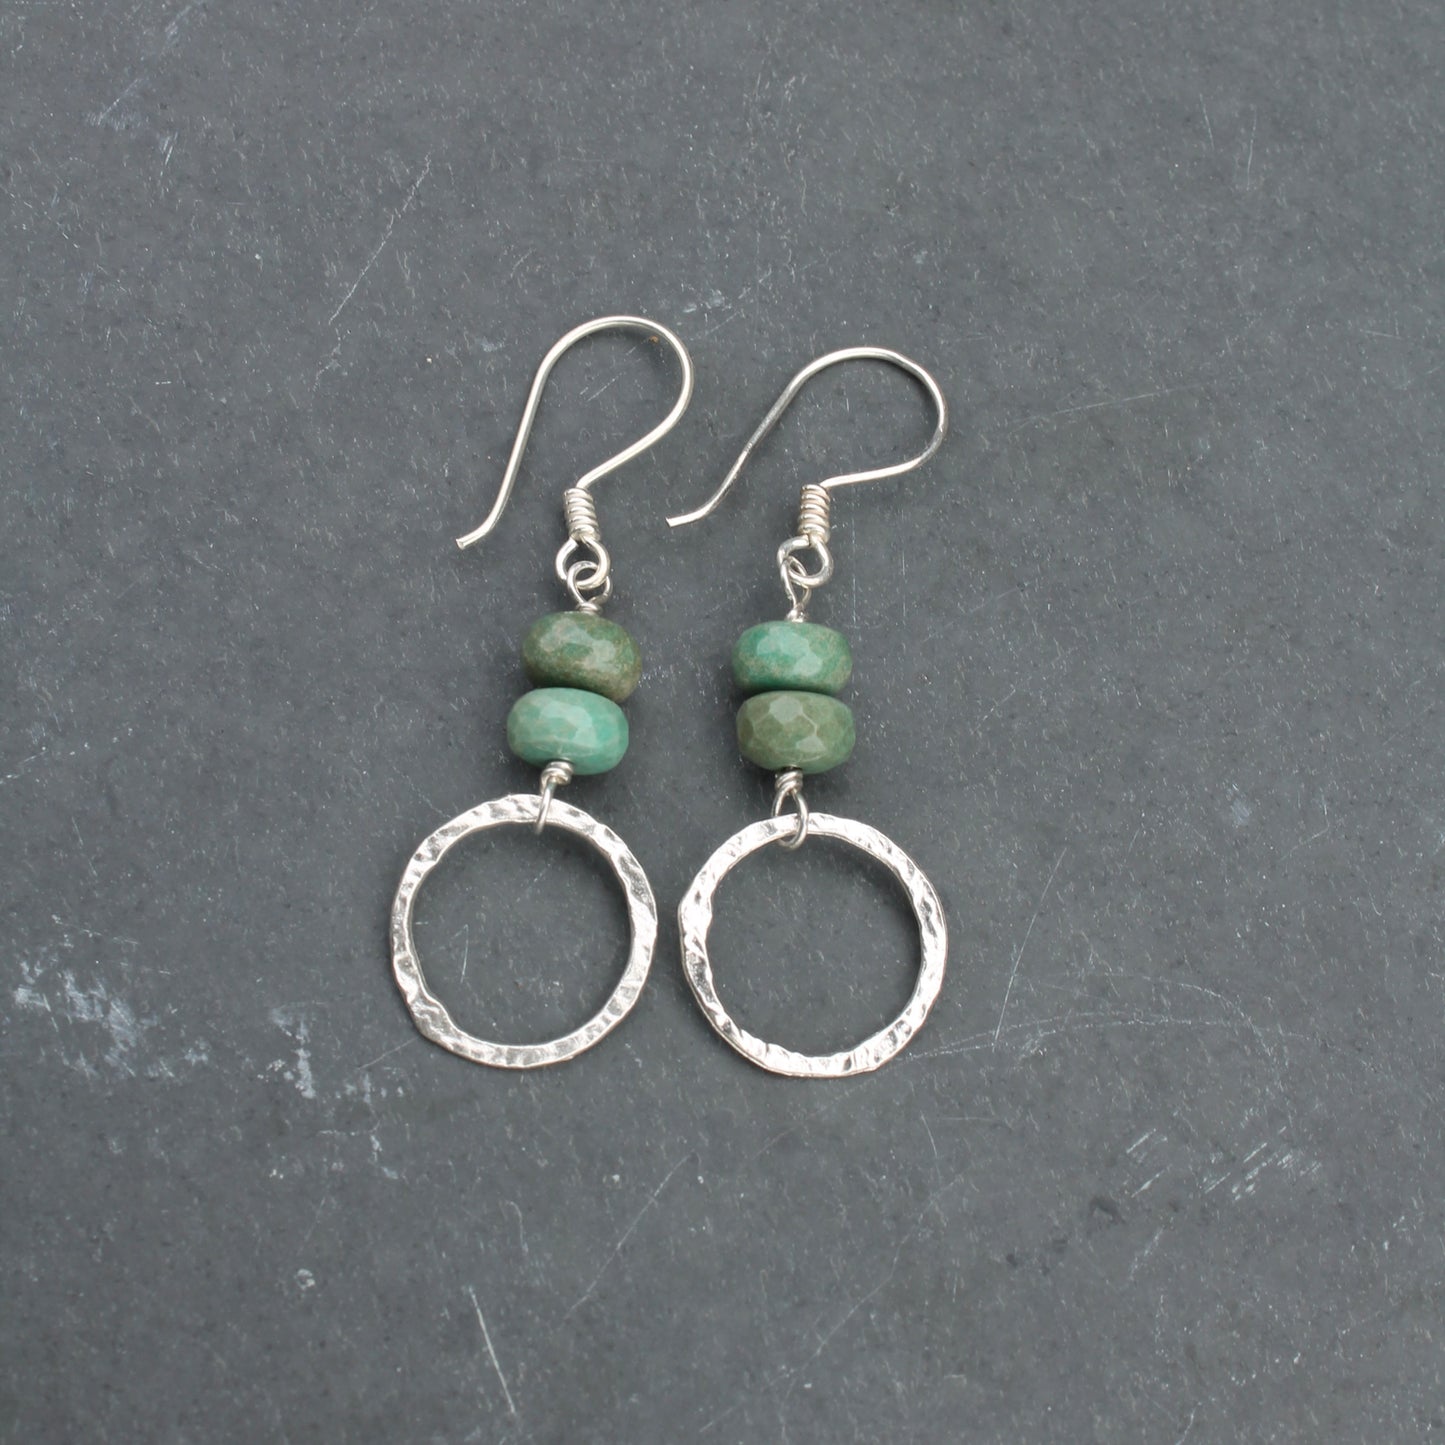 Rustic Sterling Silver Rings with Chrysoprase